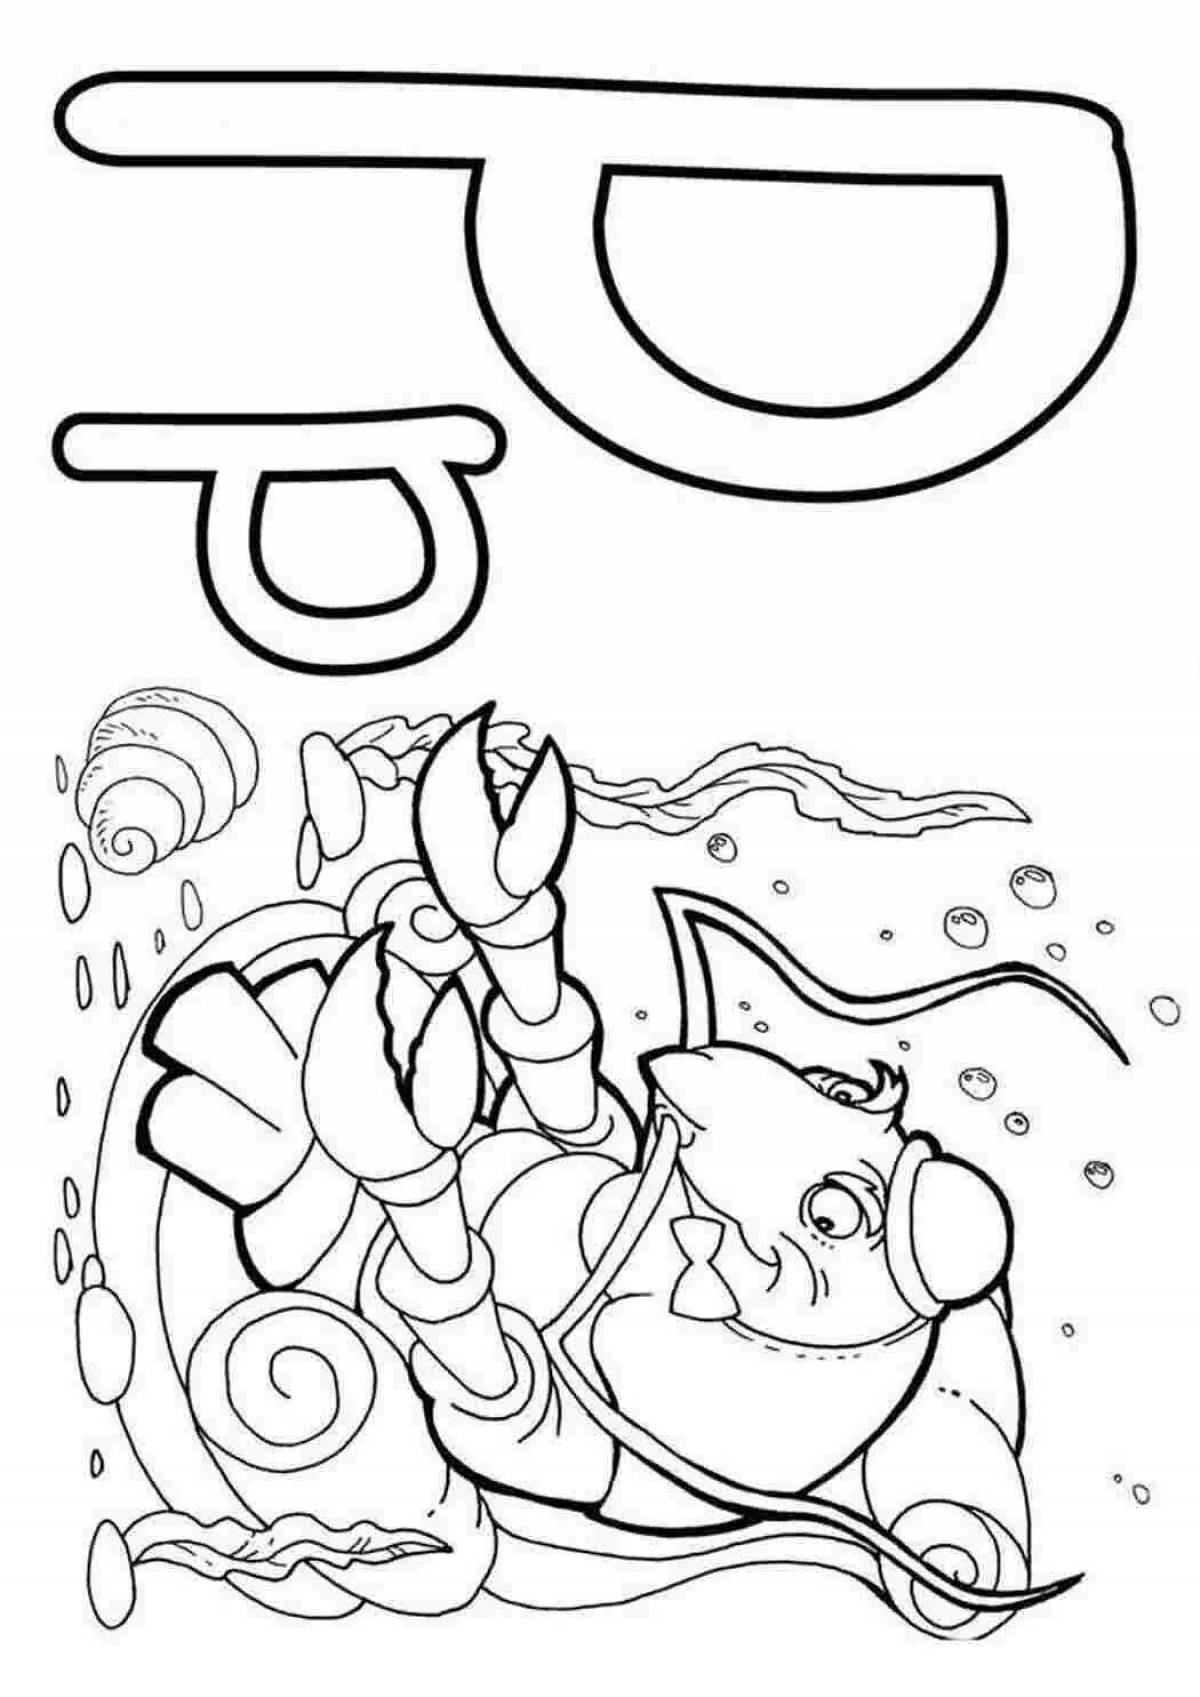 Playful p coloring page for preschoolers